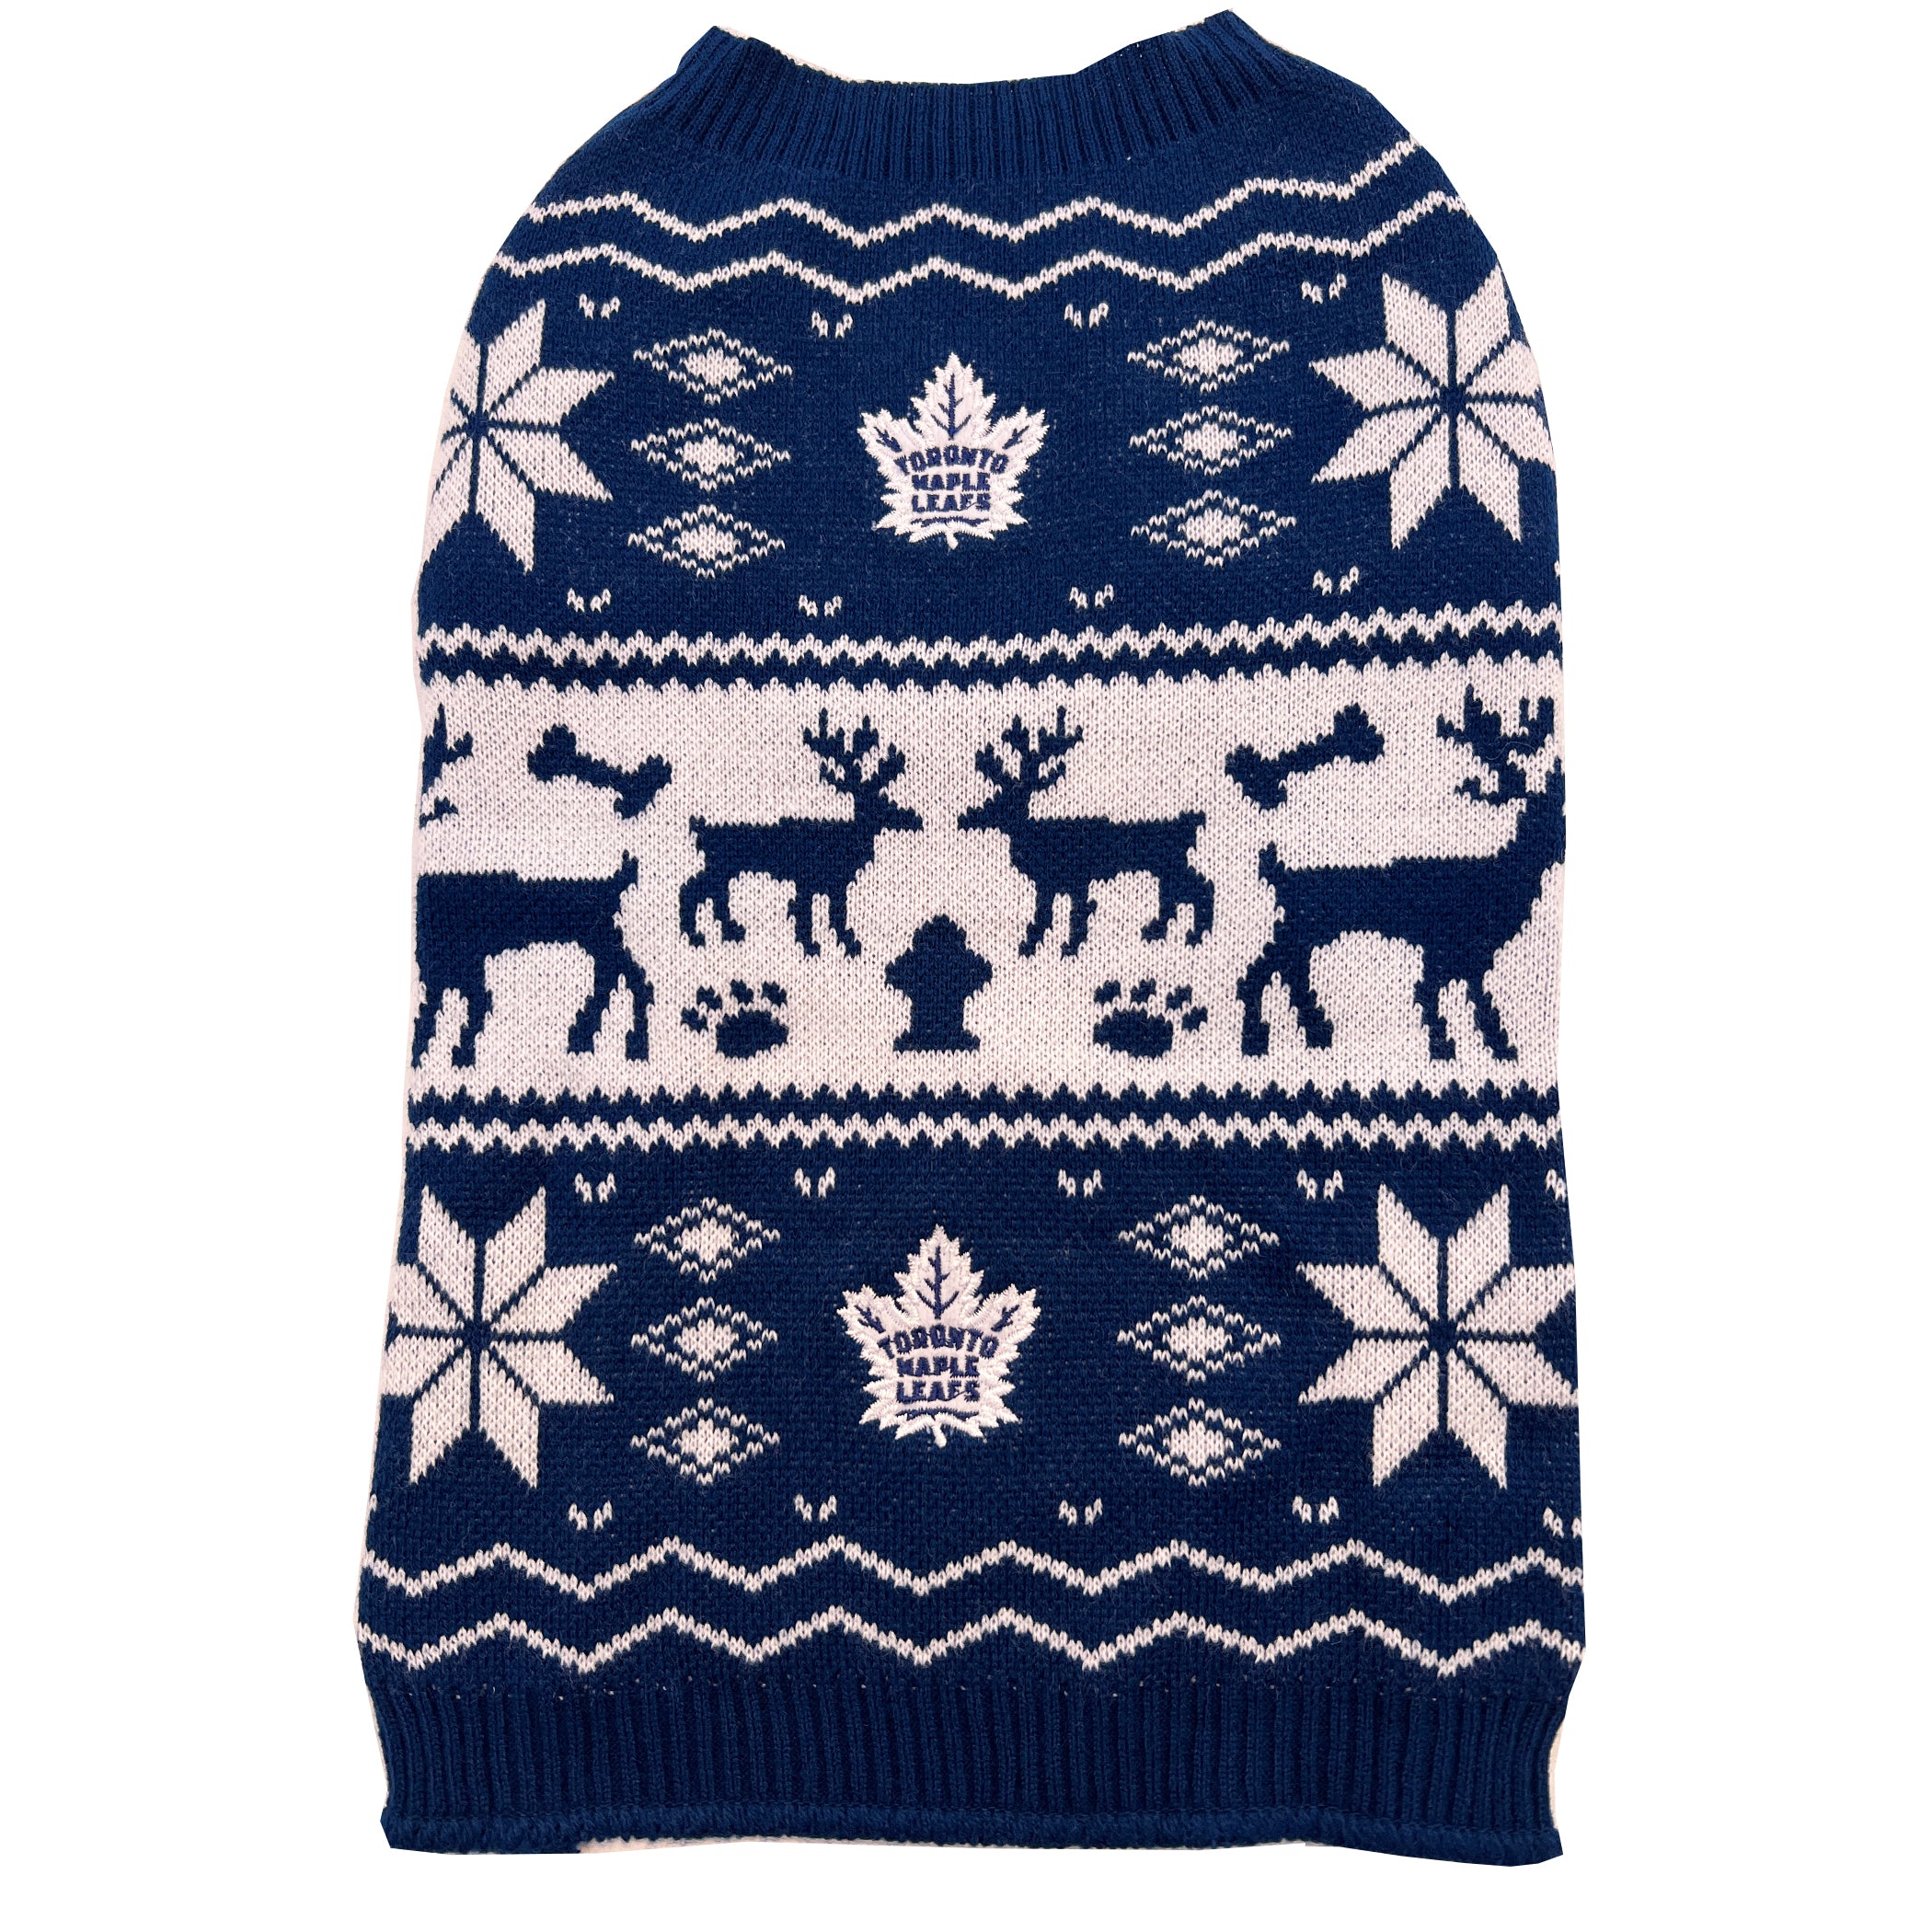 Toronto Maple Leafs Santa Claus Snowman Christmas Ugly Sweater - Limotees